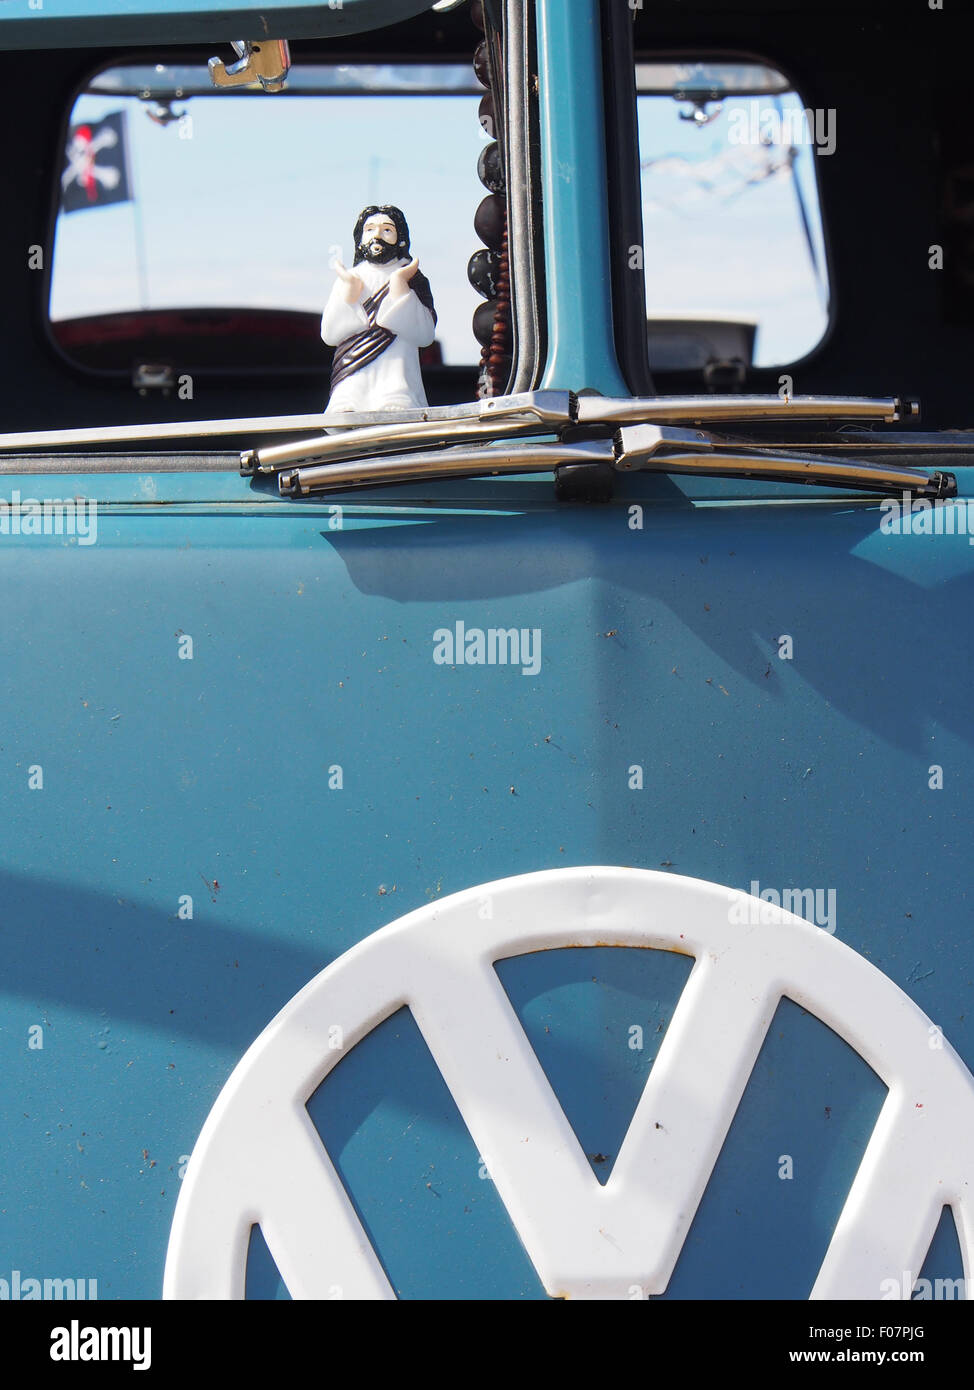 A buddy Christ figurine in the window of a VW camper van Stock Photo